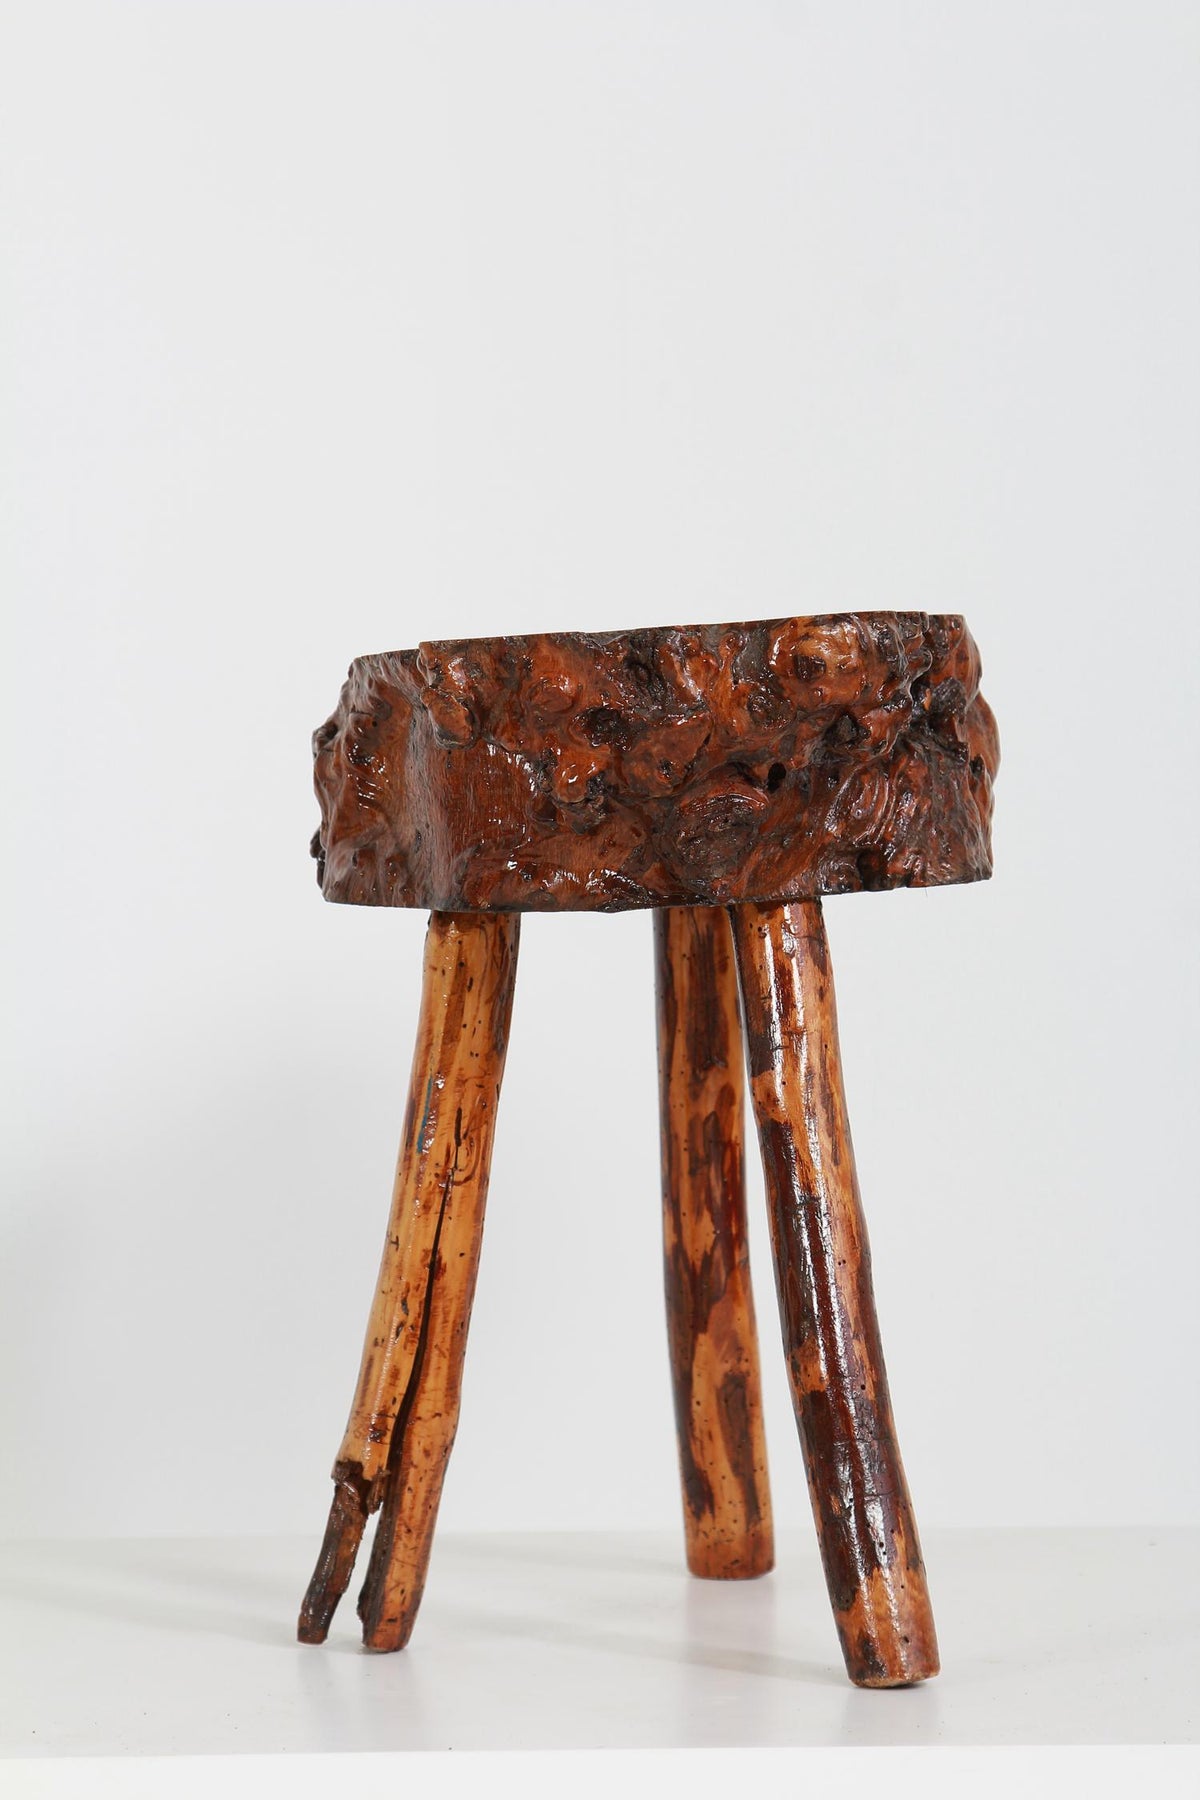 Charming Gnarly Petrified Wood Coffee/Side Table